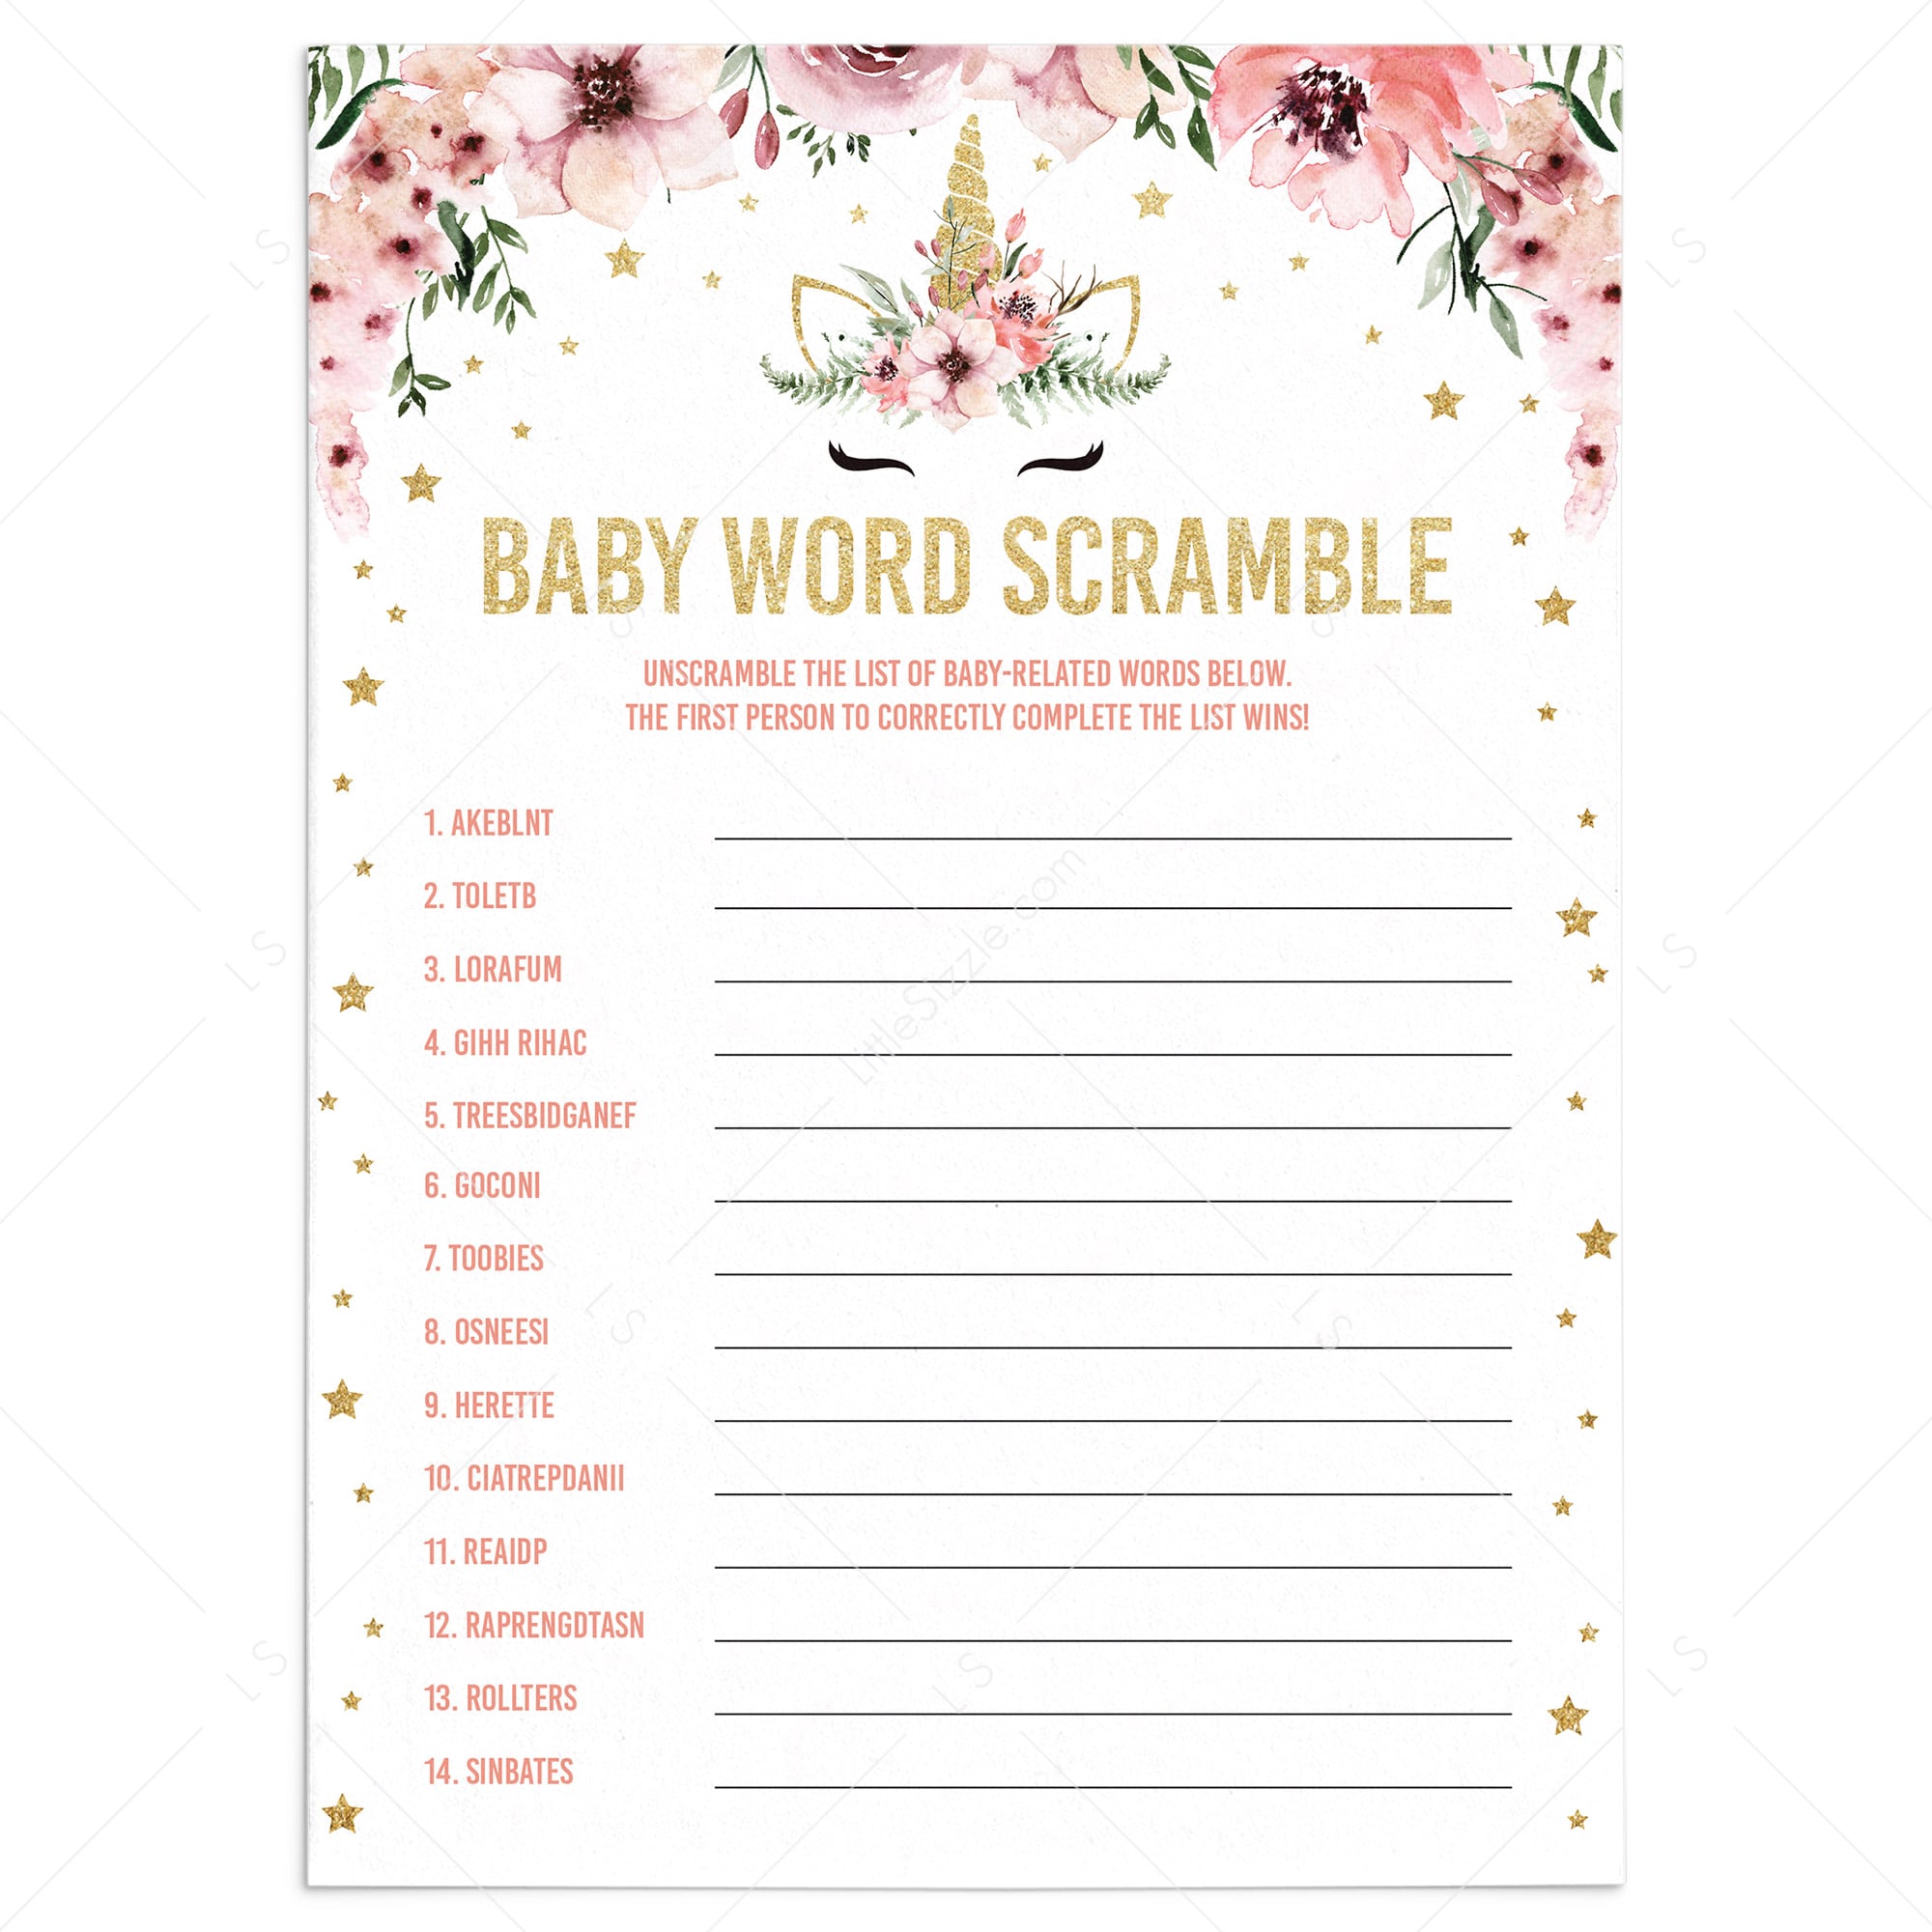 Word scramble for baby shower game unicorn theme by LittleSizzle